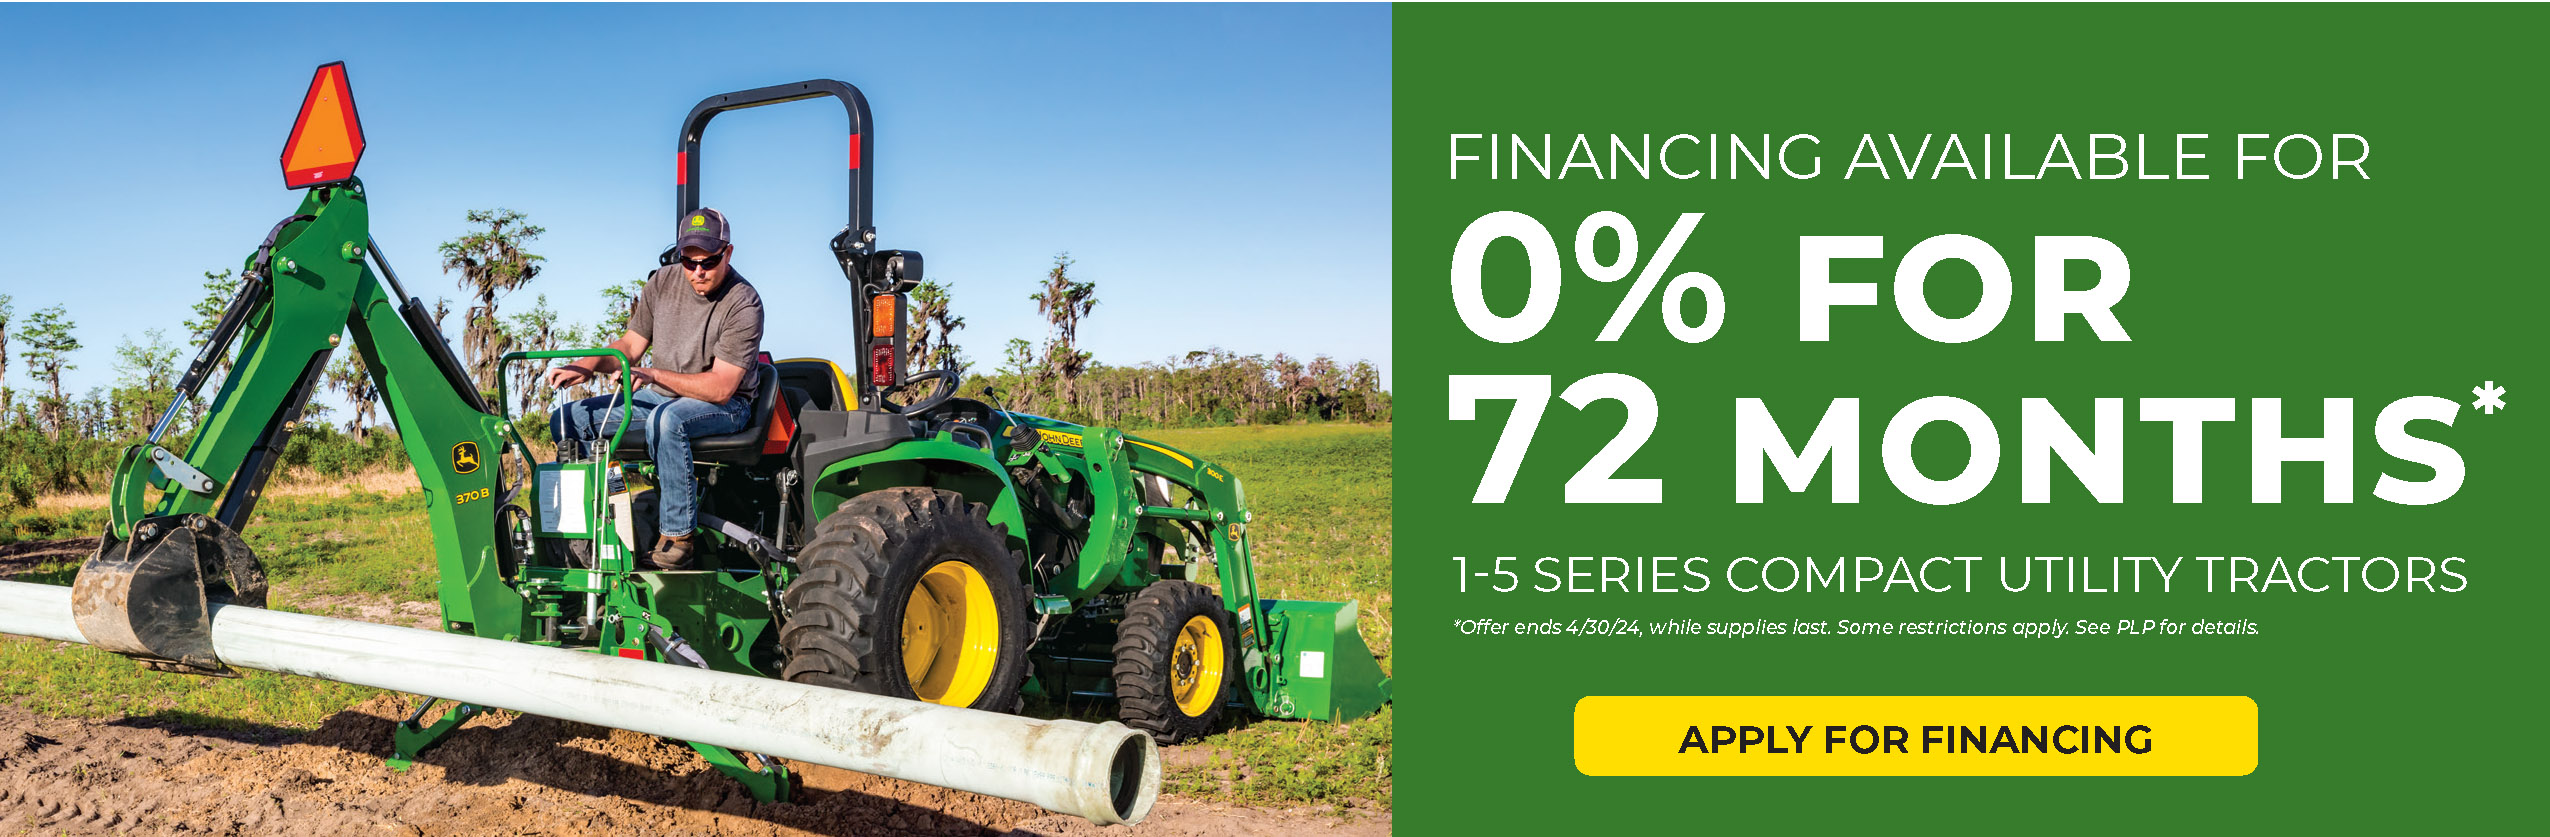 Go to creditapp.financial.deere.com (getting-started subpage)